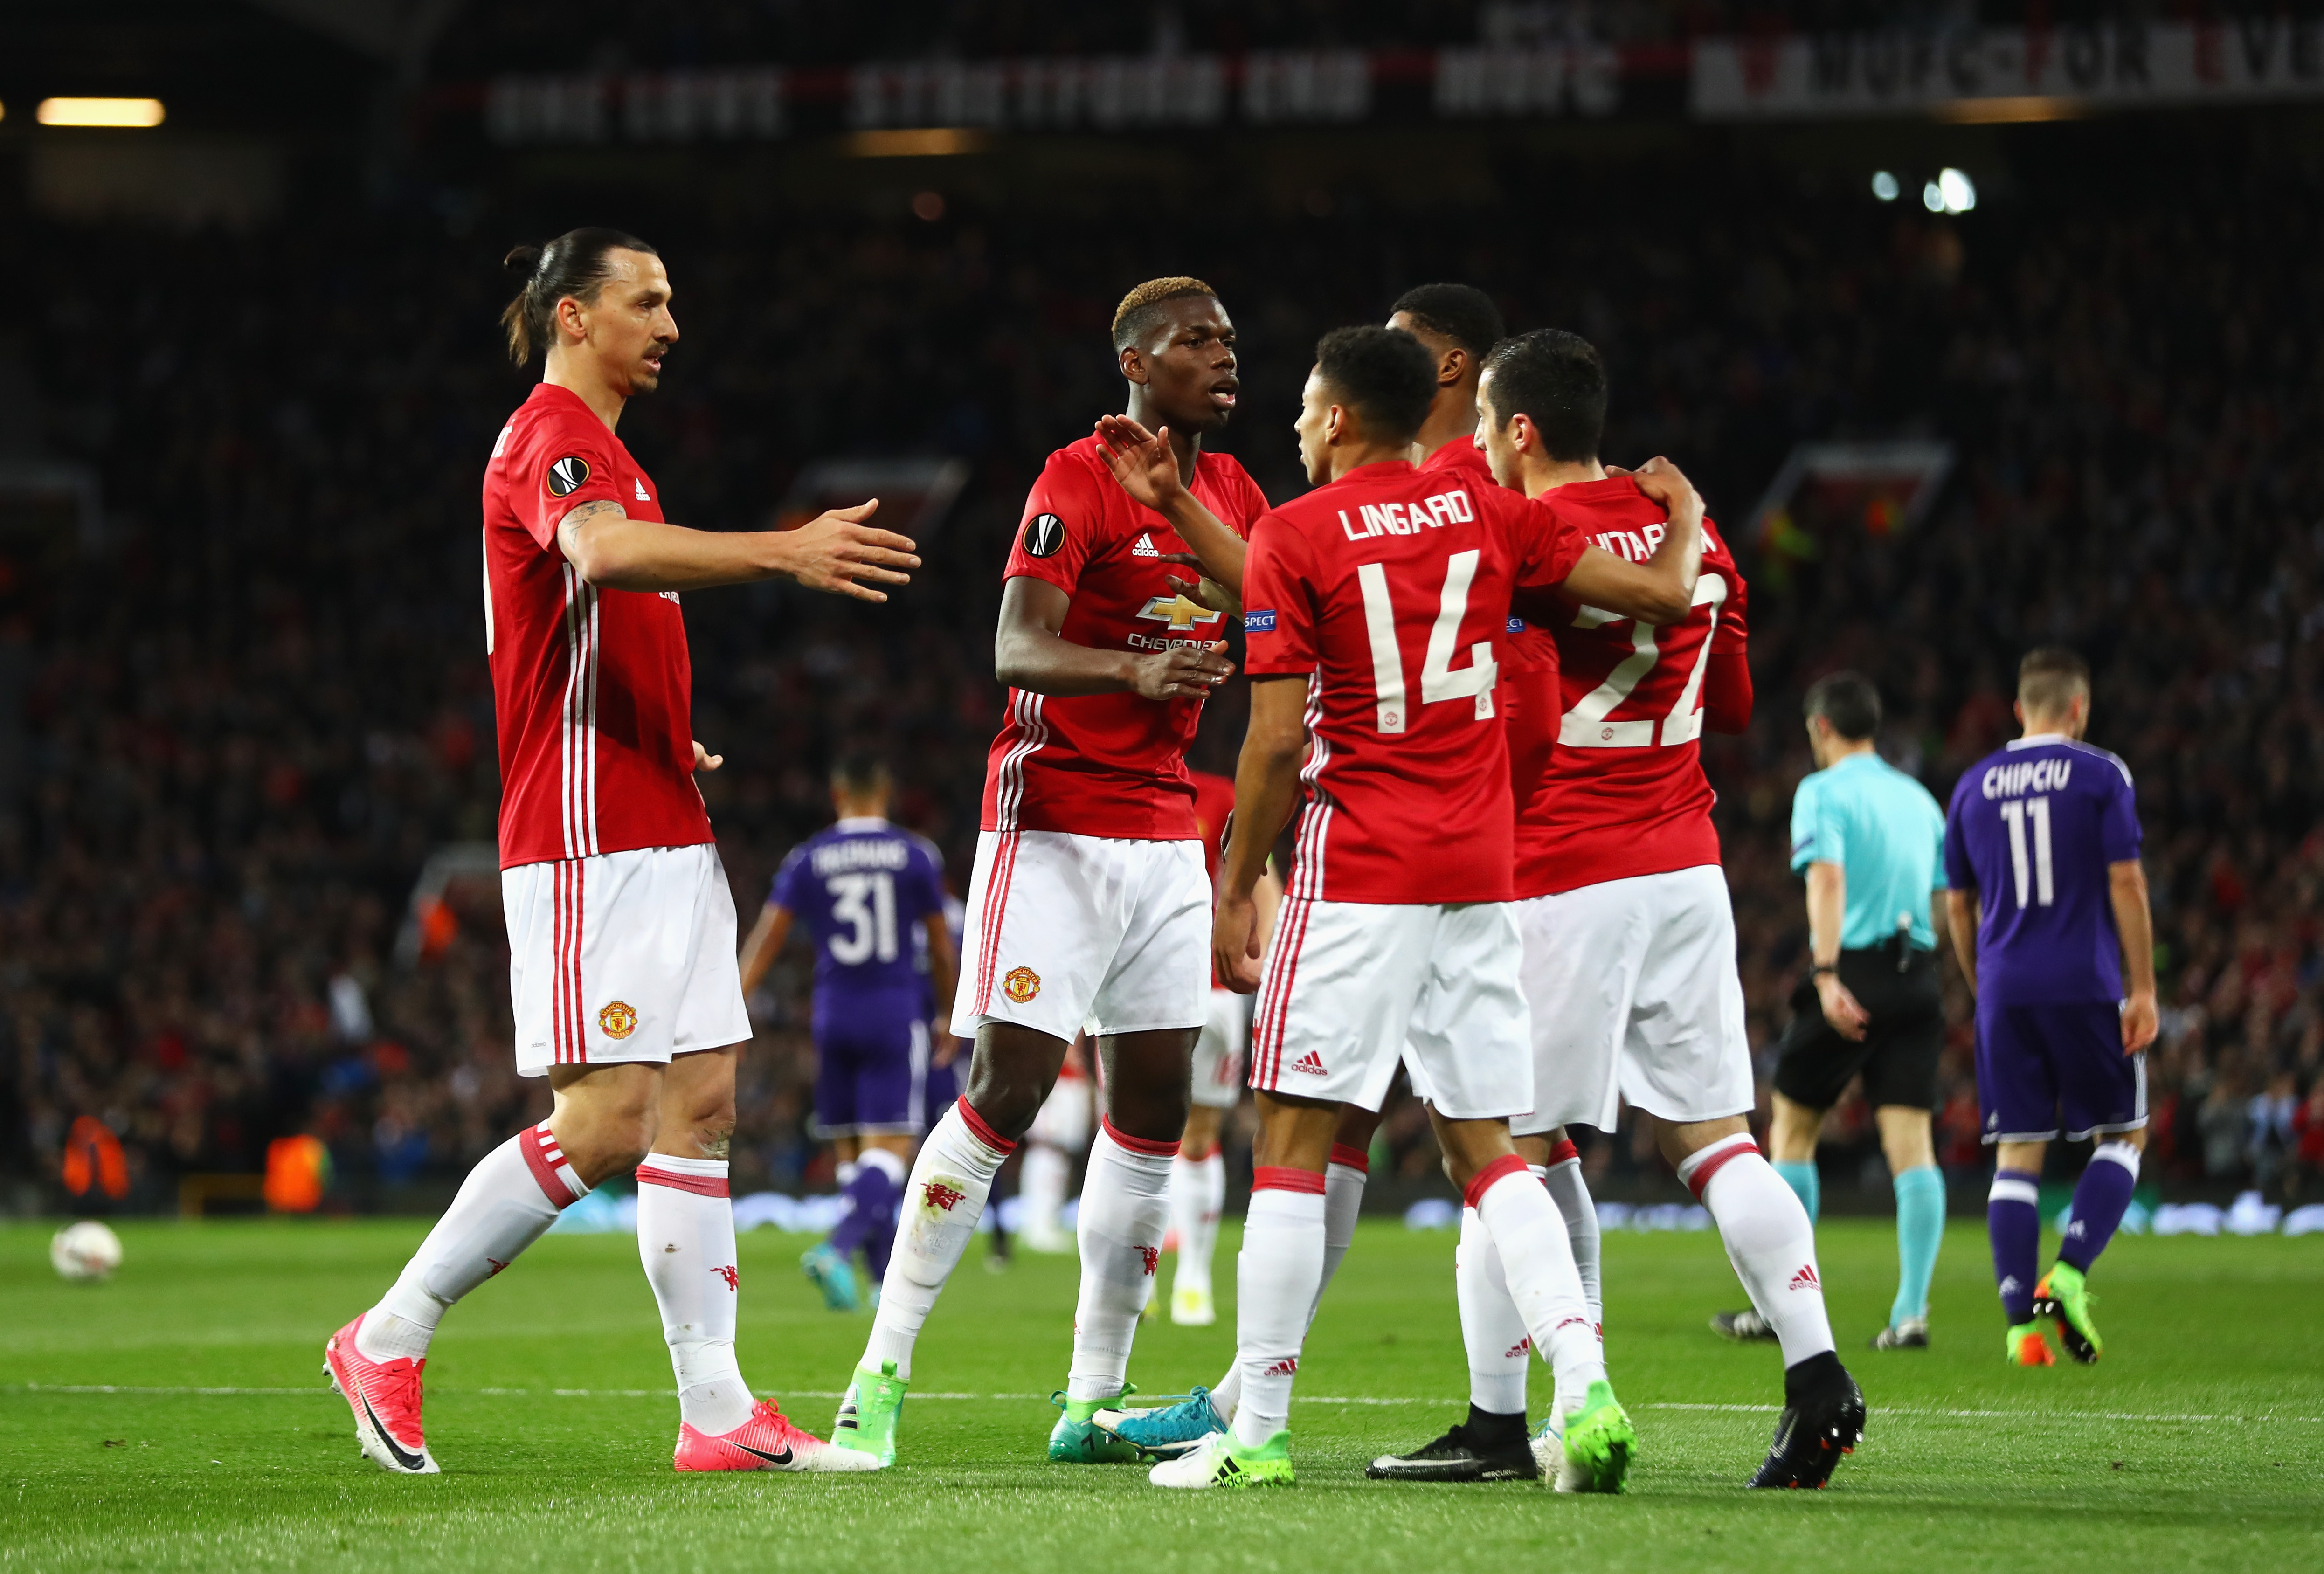 MANCHESTER, ENGLAND - APRIL 20:  Henrikh Mkhitaryan of Manchester United (22) celebrates as he scores their first goal with team matesduring the UEFA Europa League quarter final second leg match between Manchester United and RSC Anderlecht at Old Trafford on April 20, 2017 in Manchester, United Kingdom.  (Photo by Michael Steele/Getty Images)